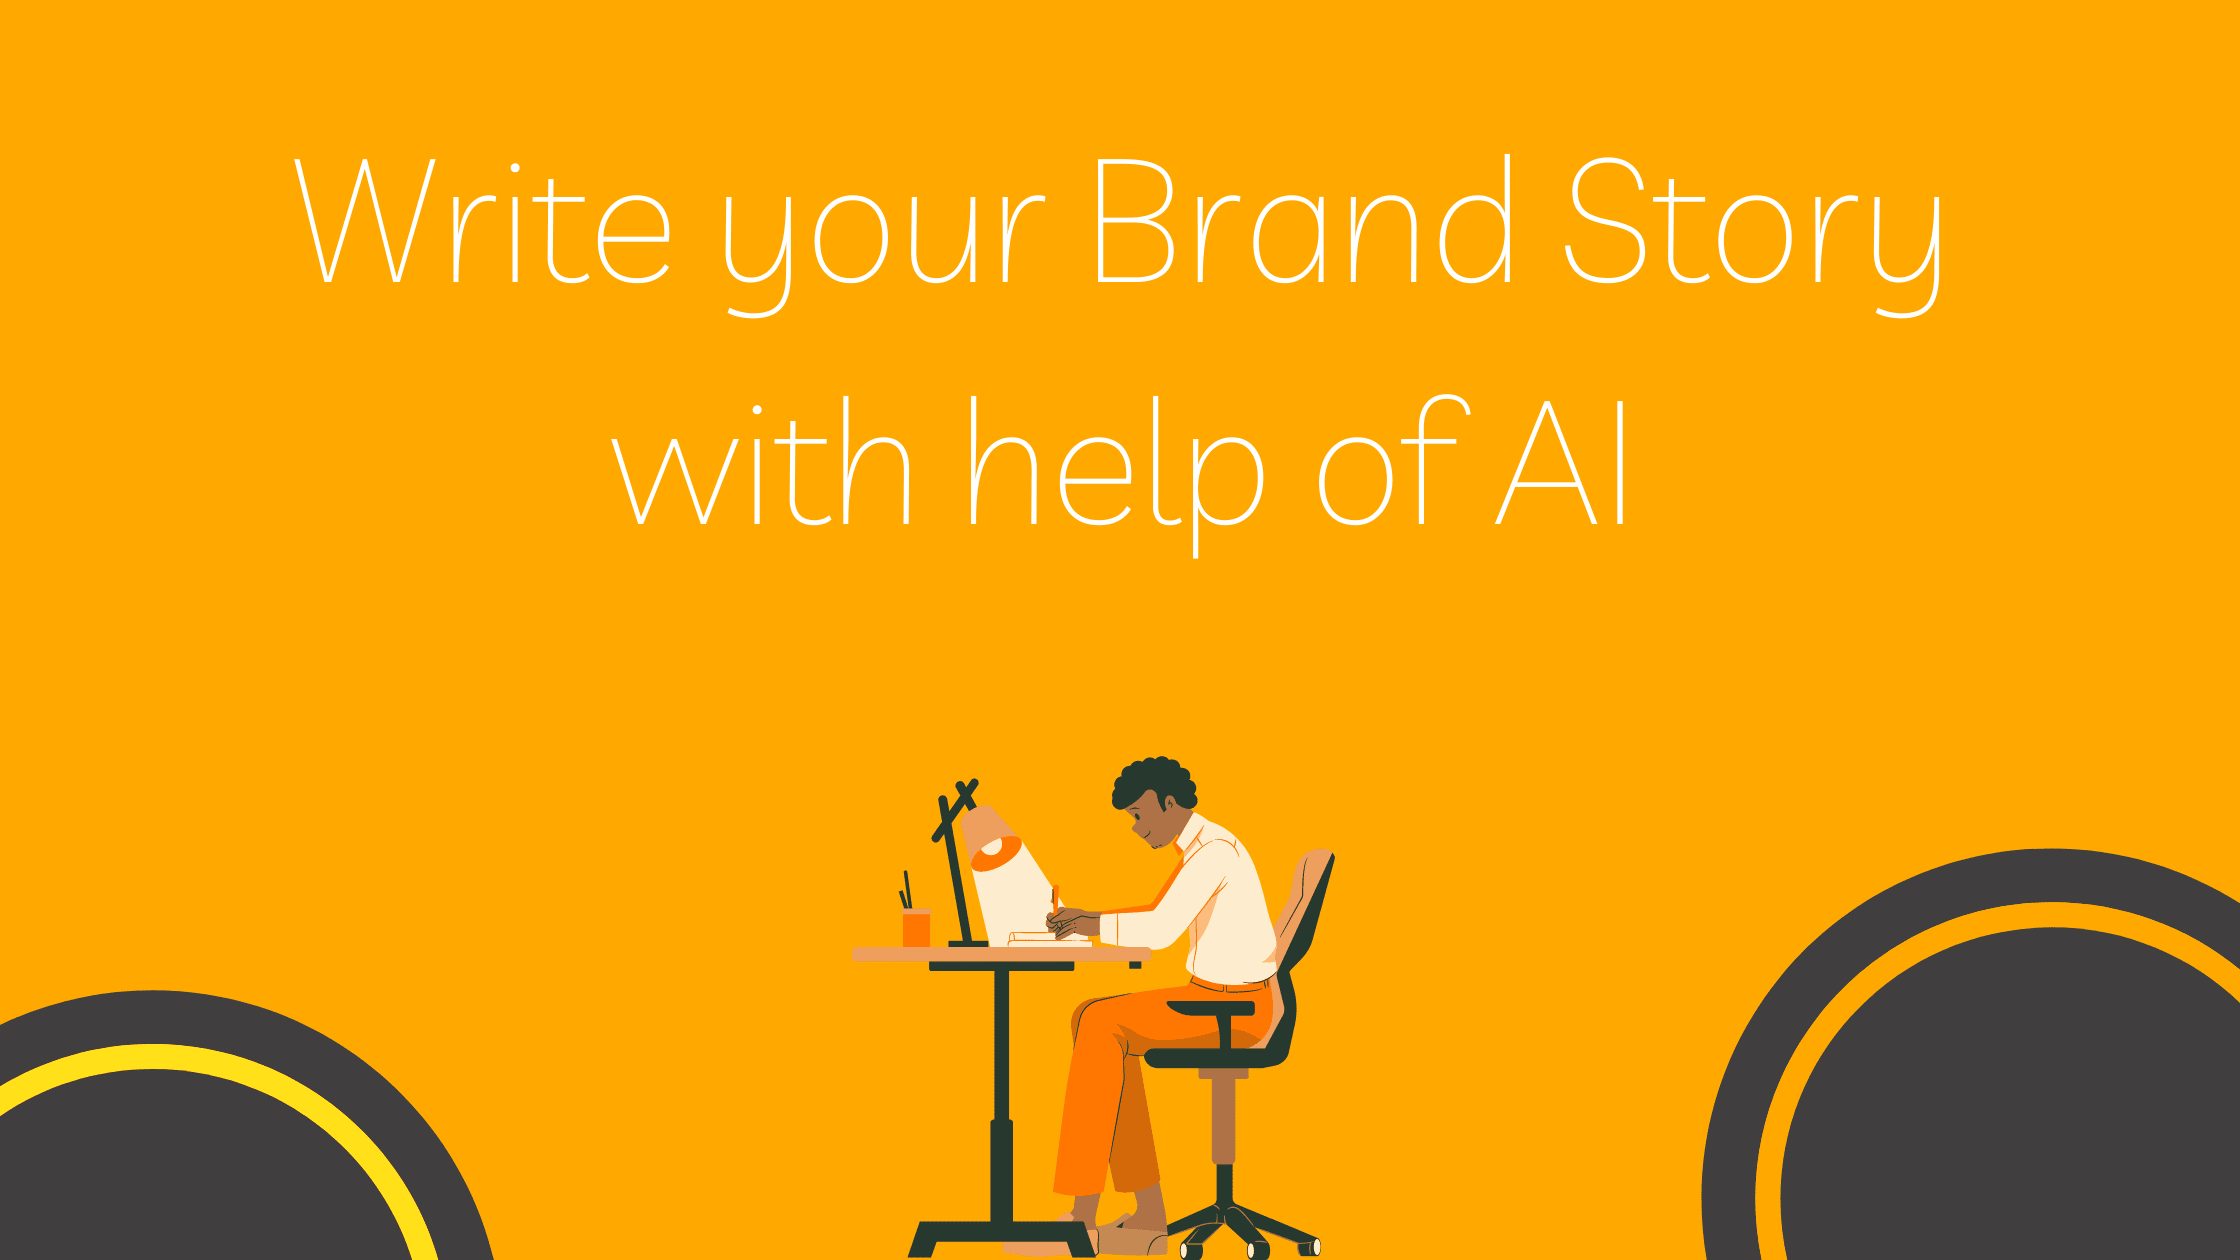 Write your Brand Story with help of AI